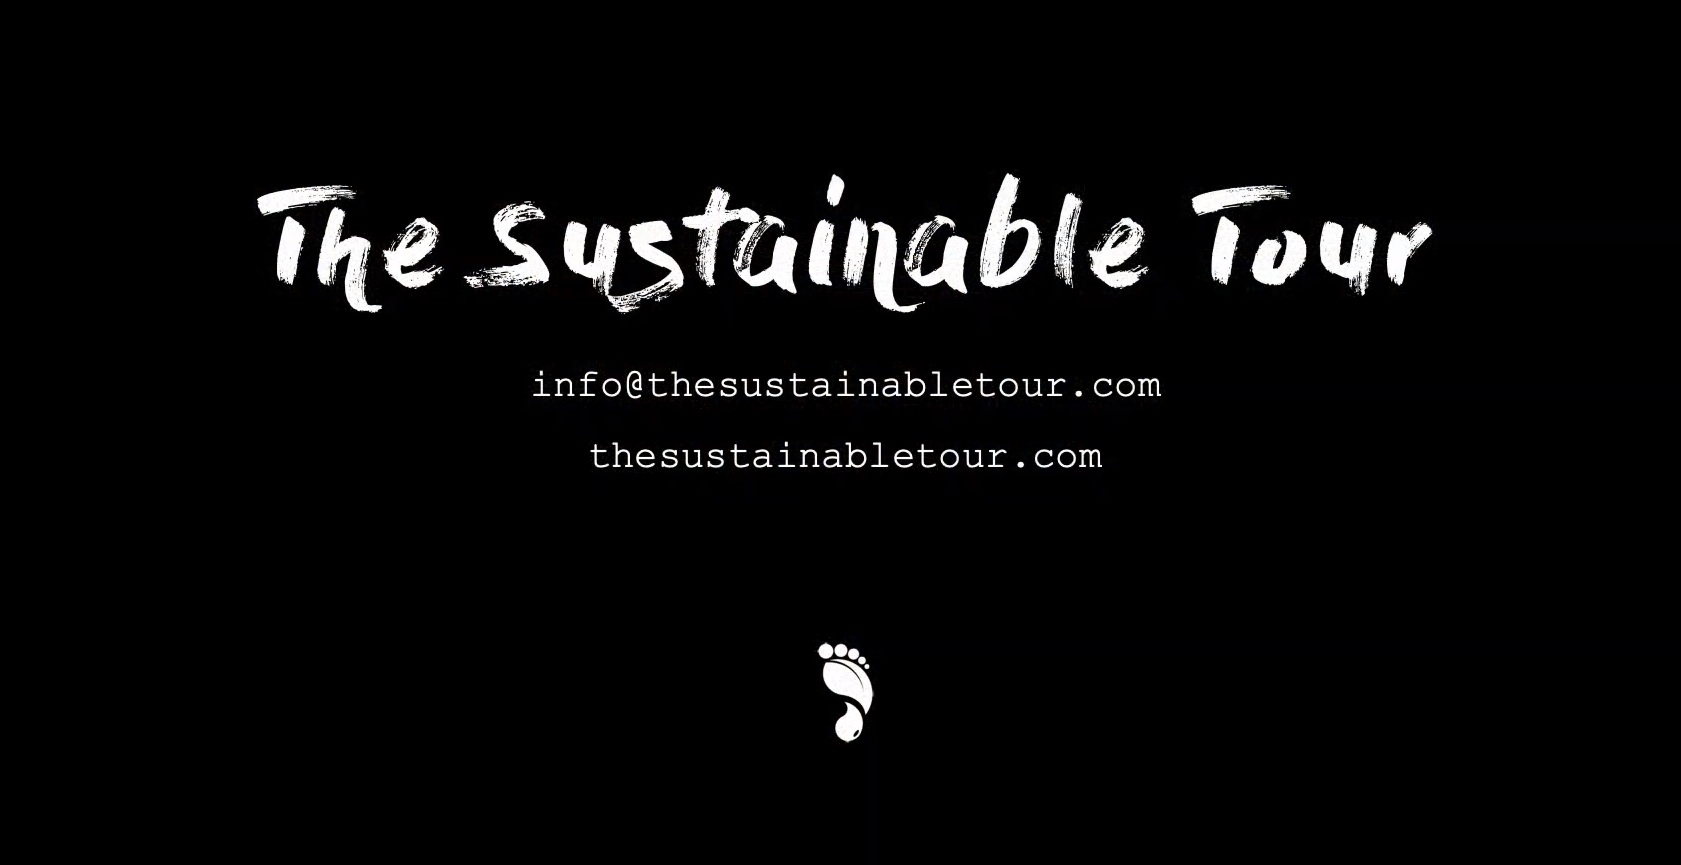 The Sustainable Tour